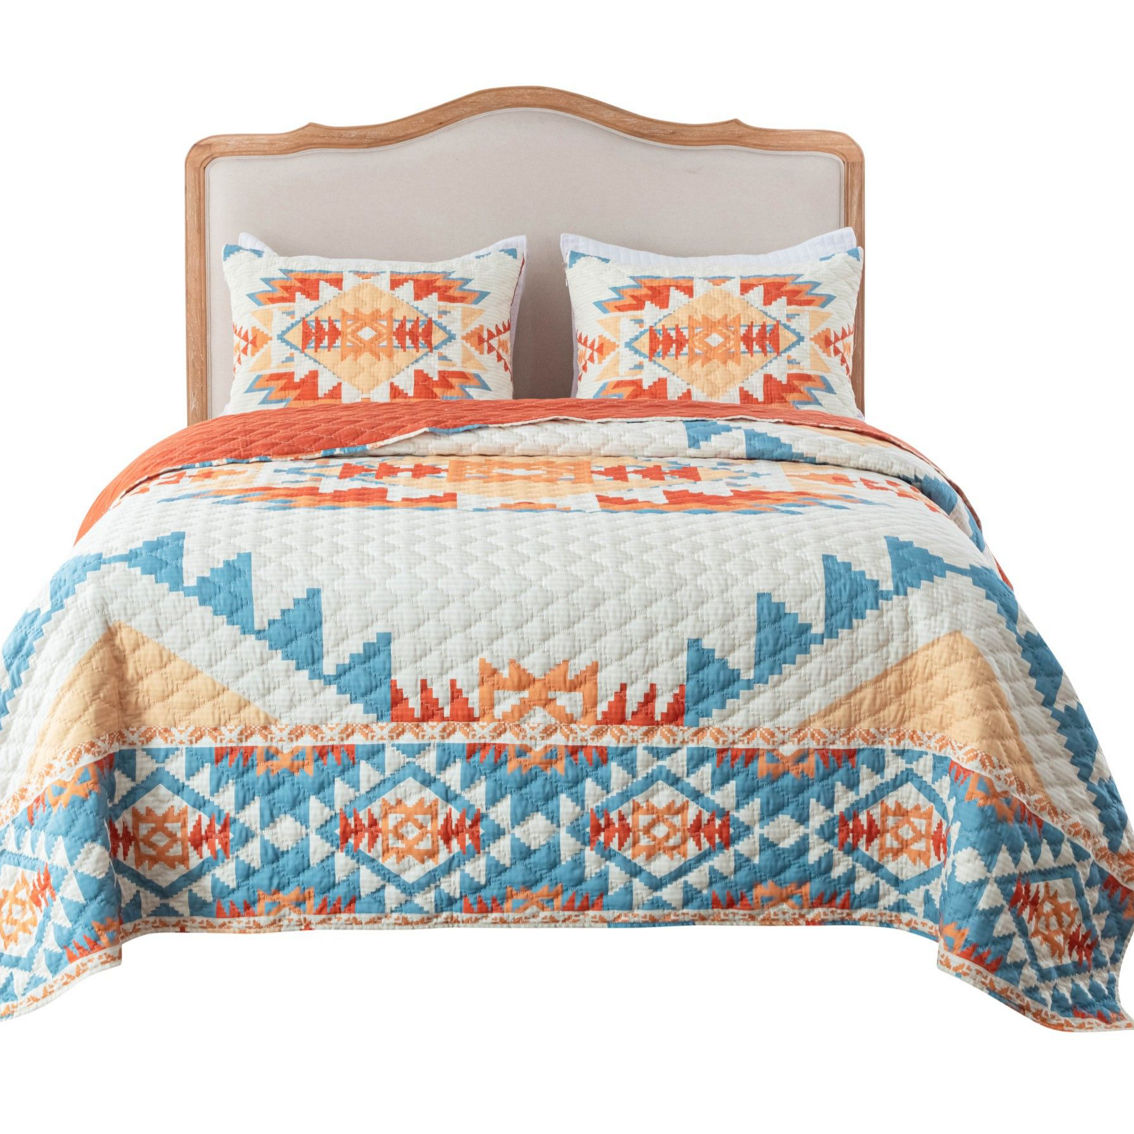 Greenland Home Horizon Cotton Blend Quilt and Pillow Sham Set - Image 4 of 4